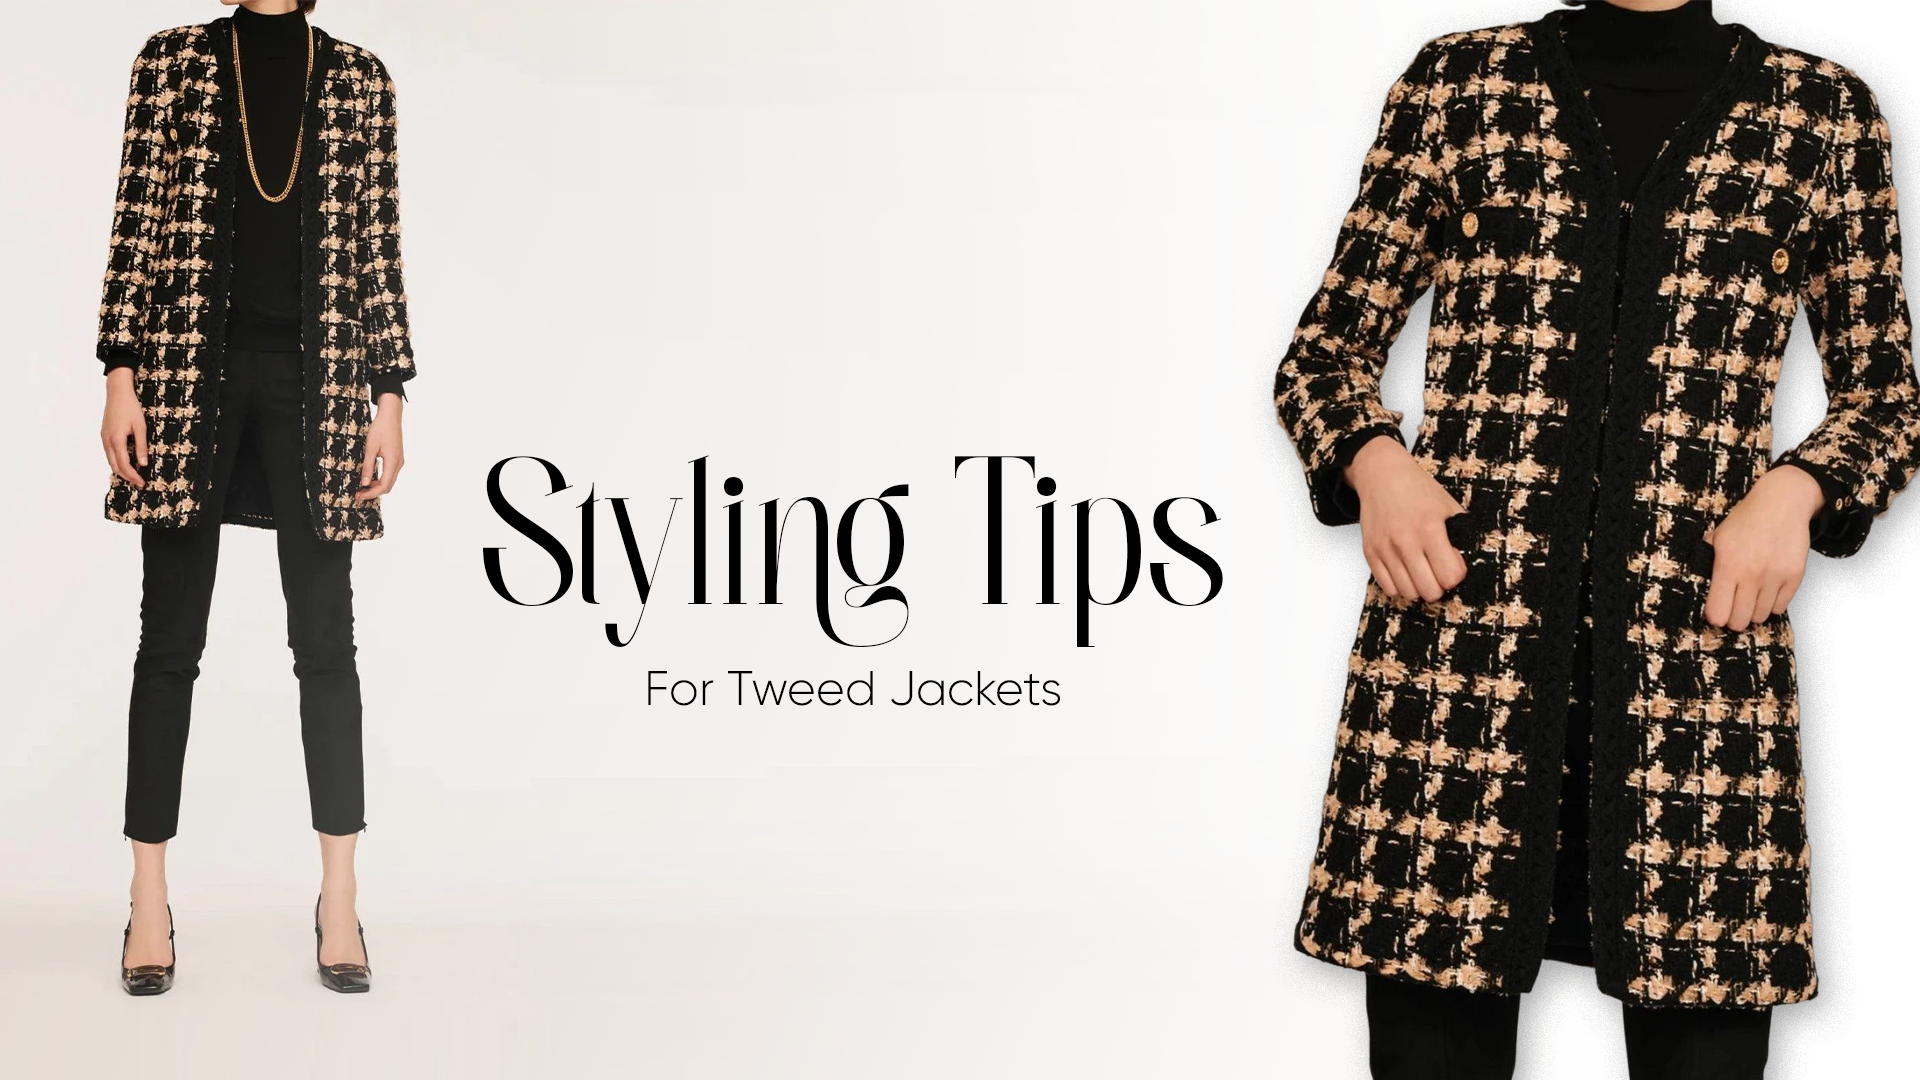 From Casual to Chic - How to Style a Tweed Jacket for Any Occasion